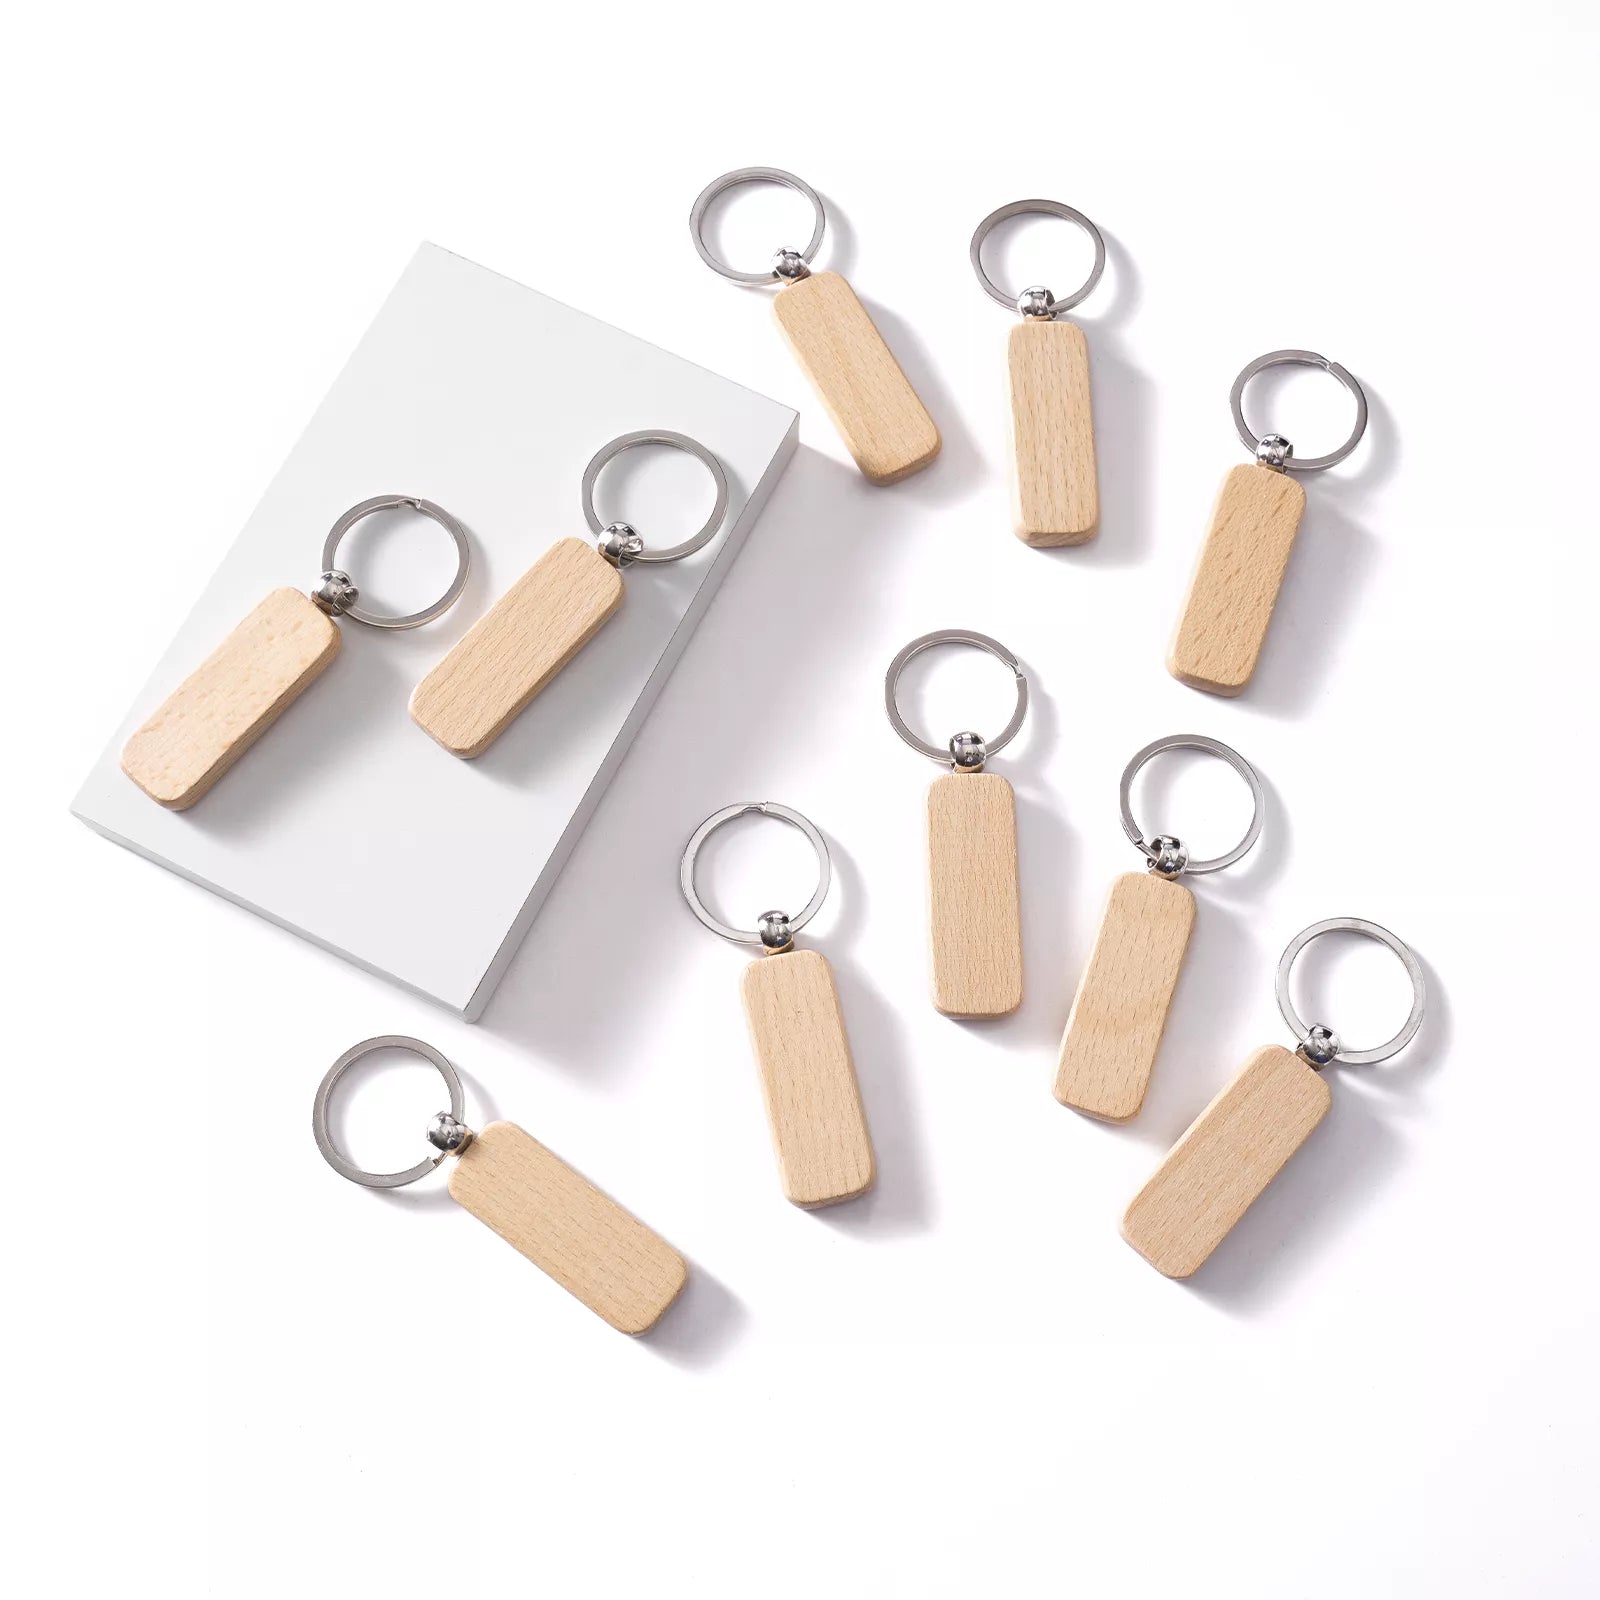 Rounded Rectangle Strip Wooden Keychain (10pcs)